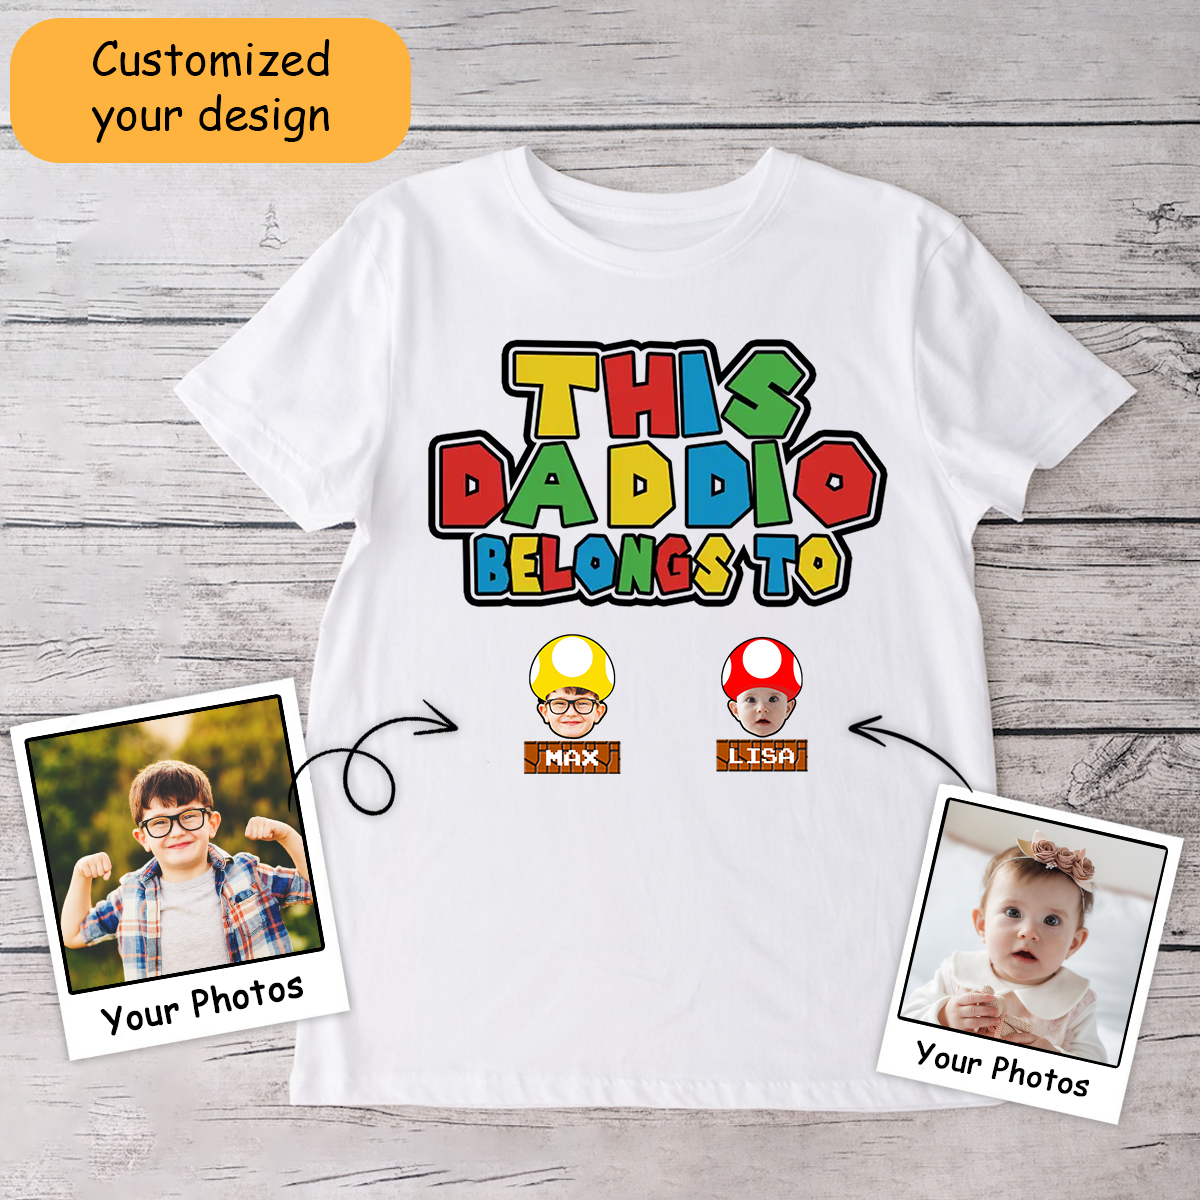 Customized Shirt This Daddio Belongs To Custom Kid For Dad, For Husband, For Father, Grandpa, Personalized Father's Day Gift